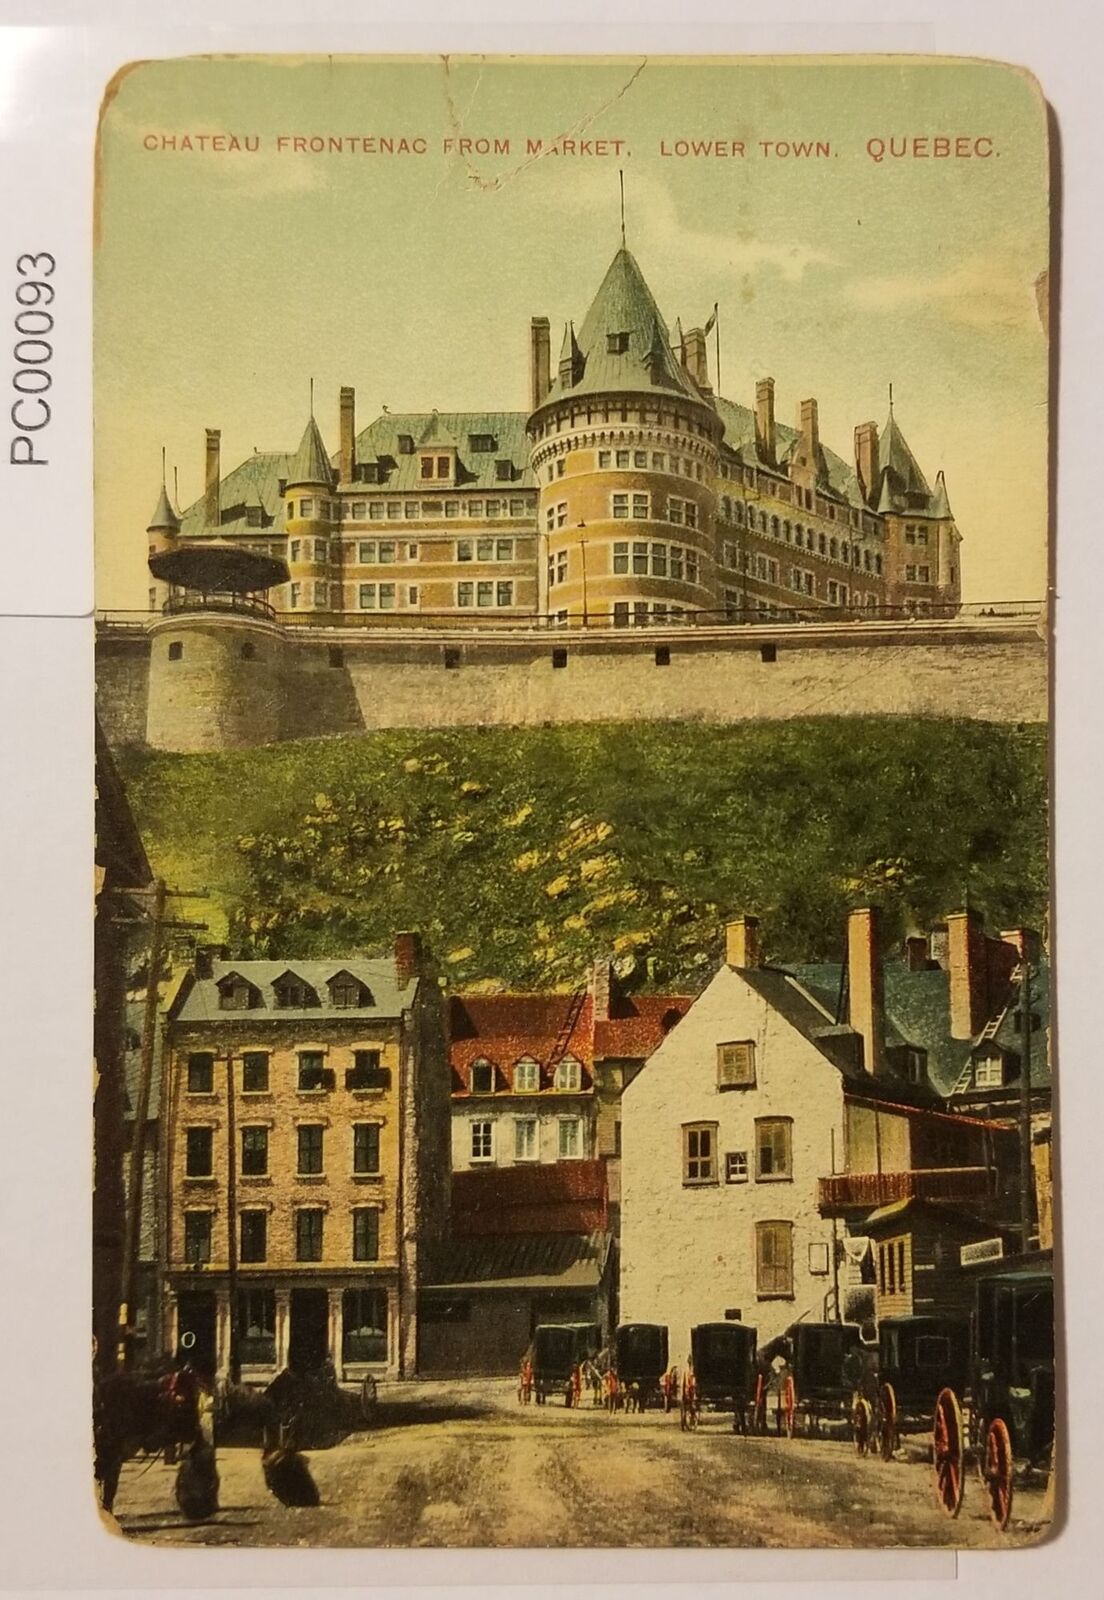 Chateau Frontenac from Market Lower Town Quebec Canada Postcard